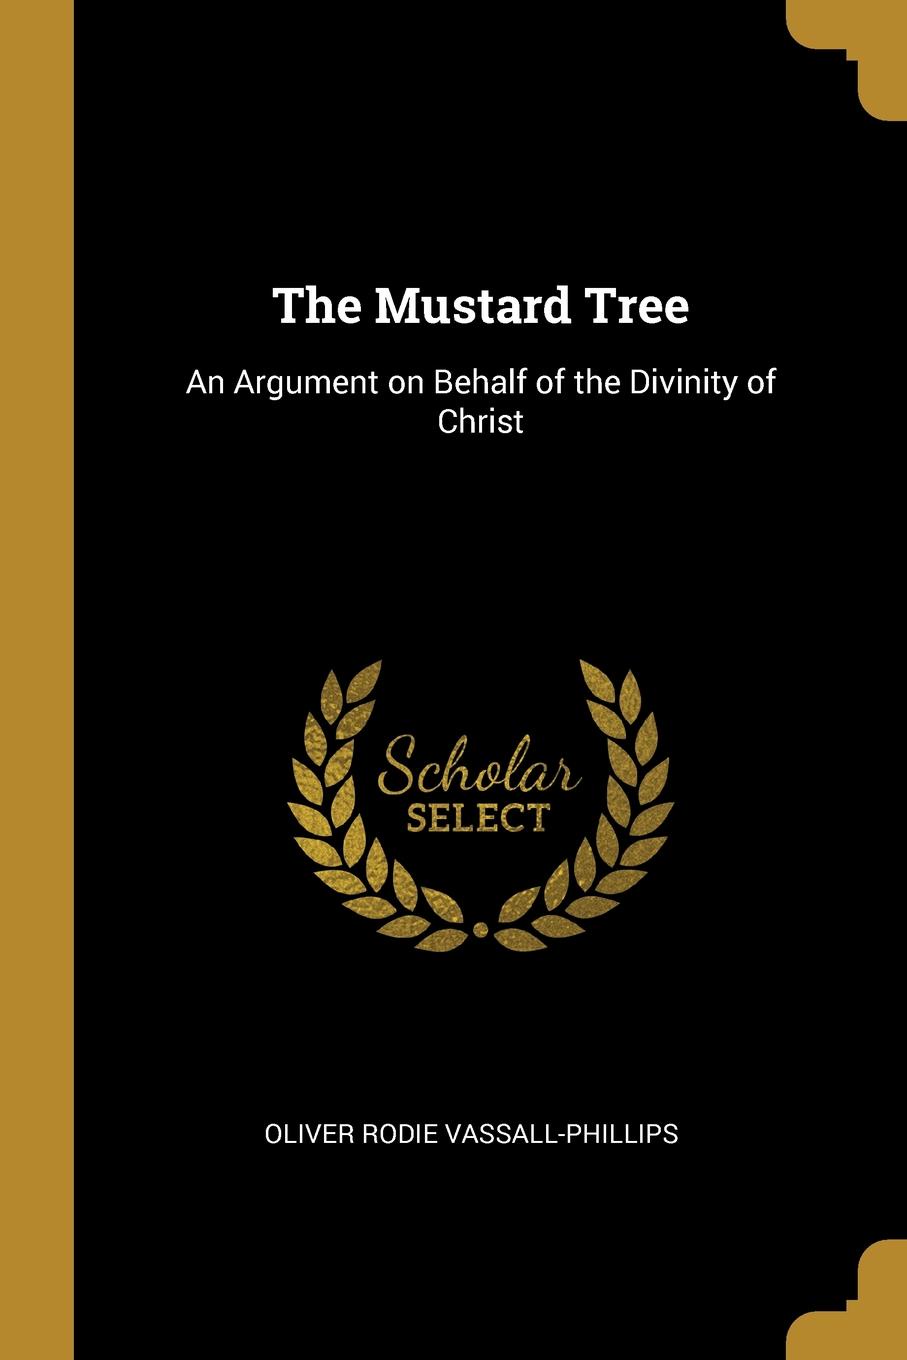 The Mustard Tree. An Argument on Behalf of the Divinity of Christ